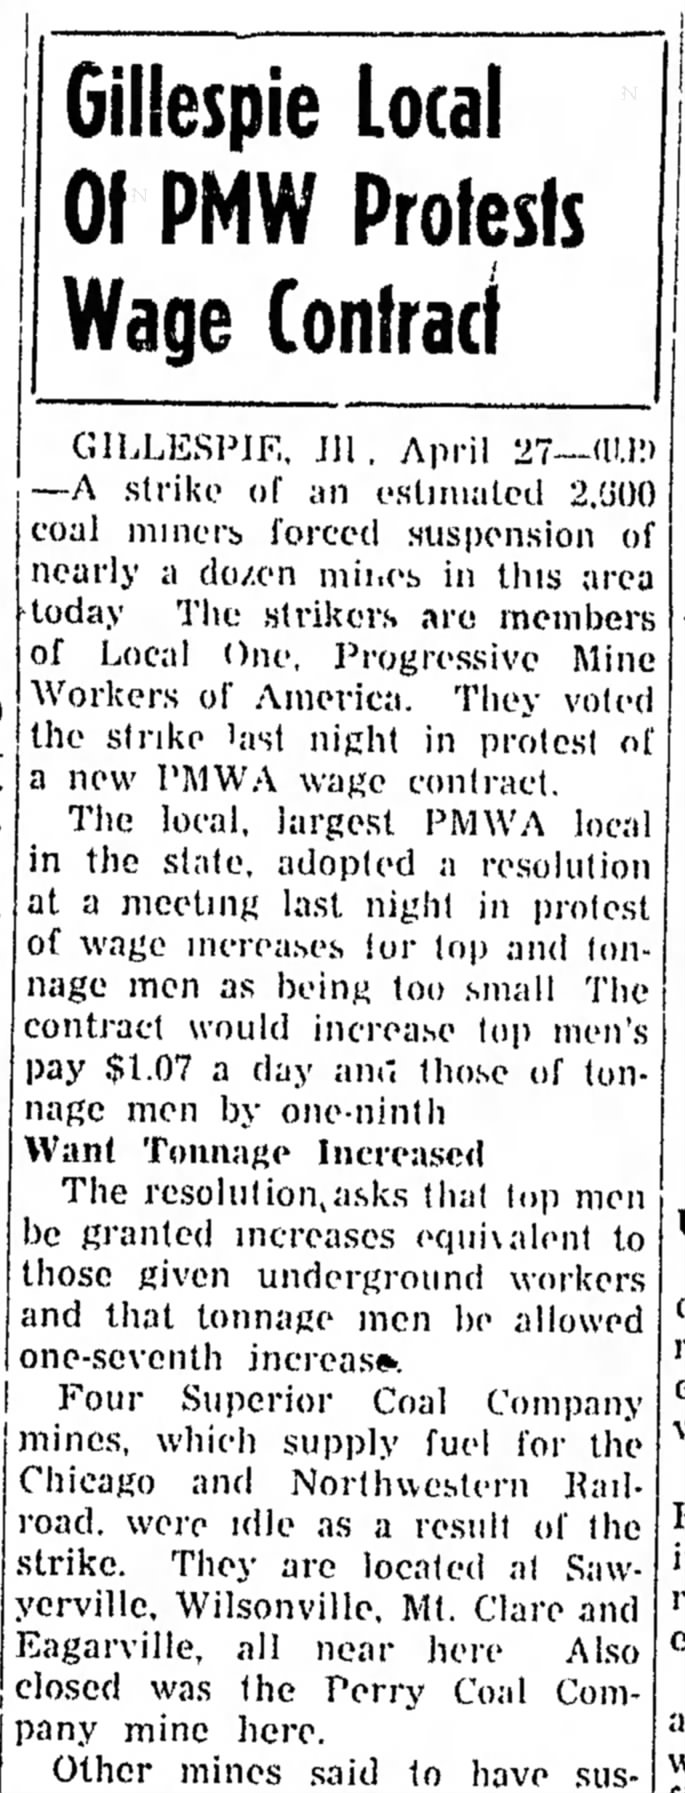 Miners want more pay 4/27/45